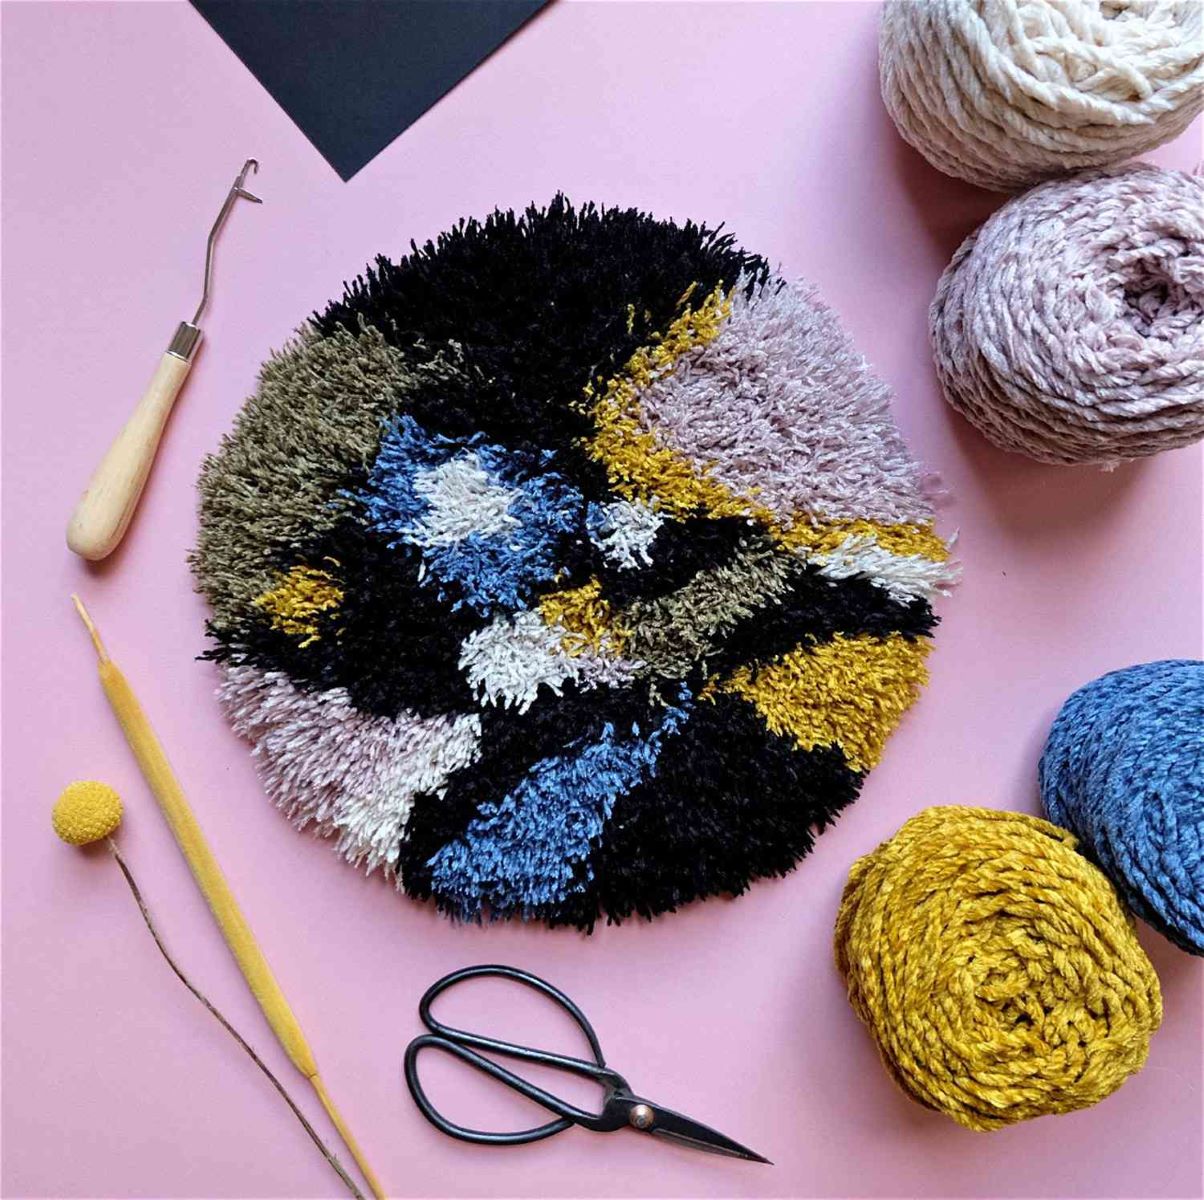 How To Make Latch Hook Rugs